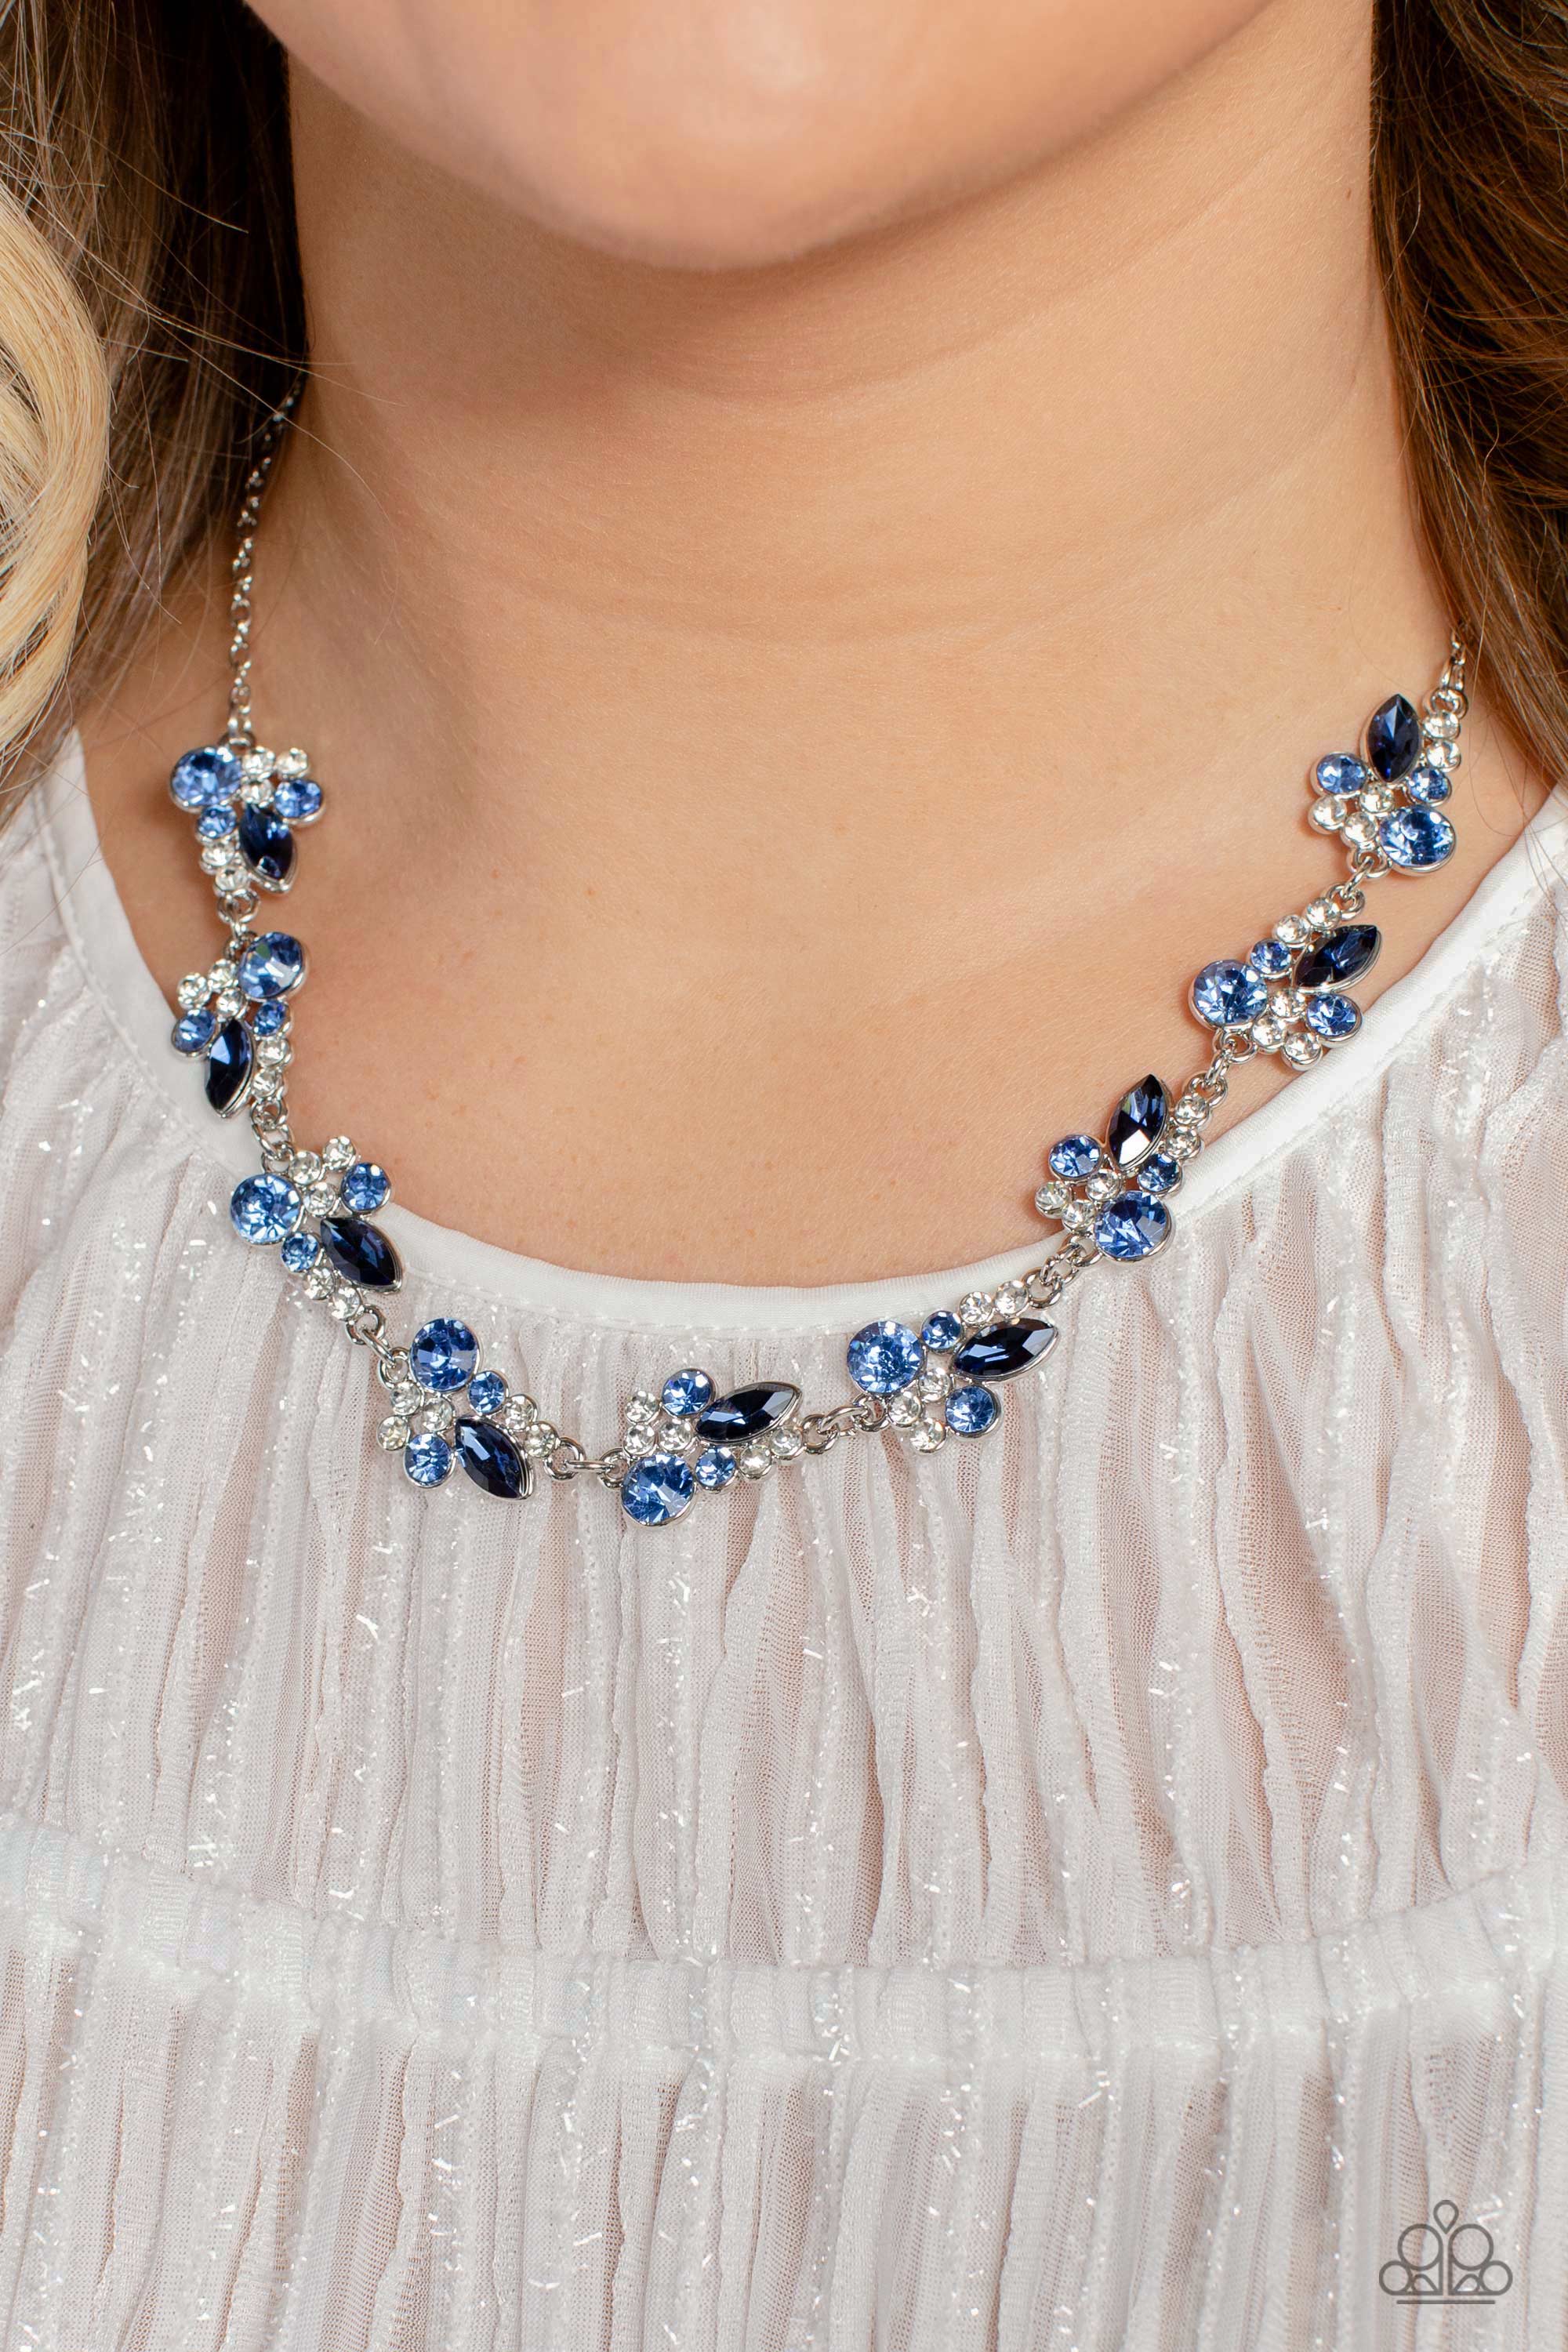 Swimming in Sparkles Blue Rhinestone Necklace - Paparazzi Accessories- lightbox - CarasShop.com - $5 Jewelry by Cara Jewels